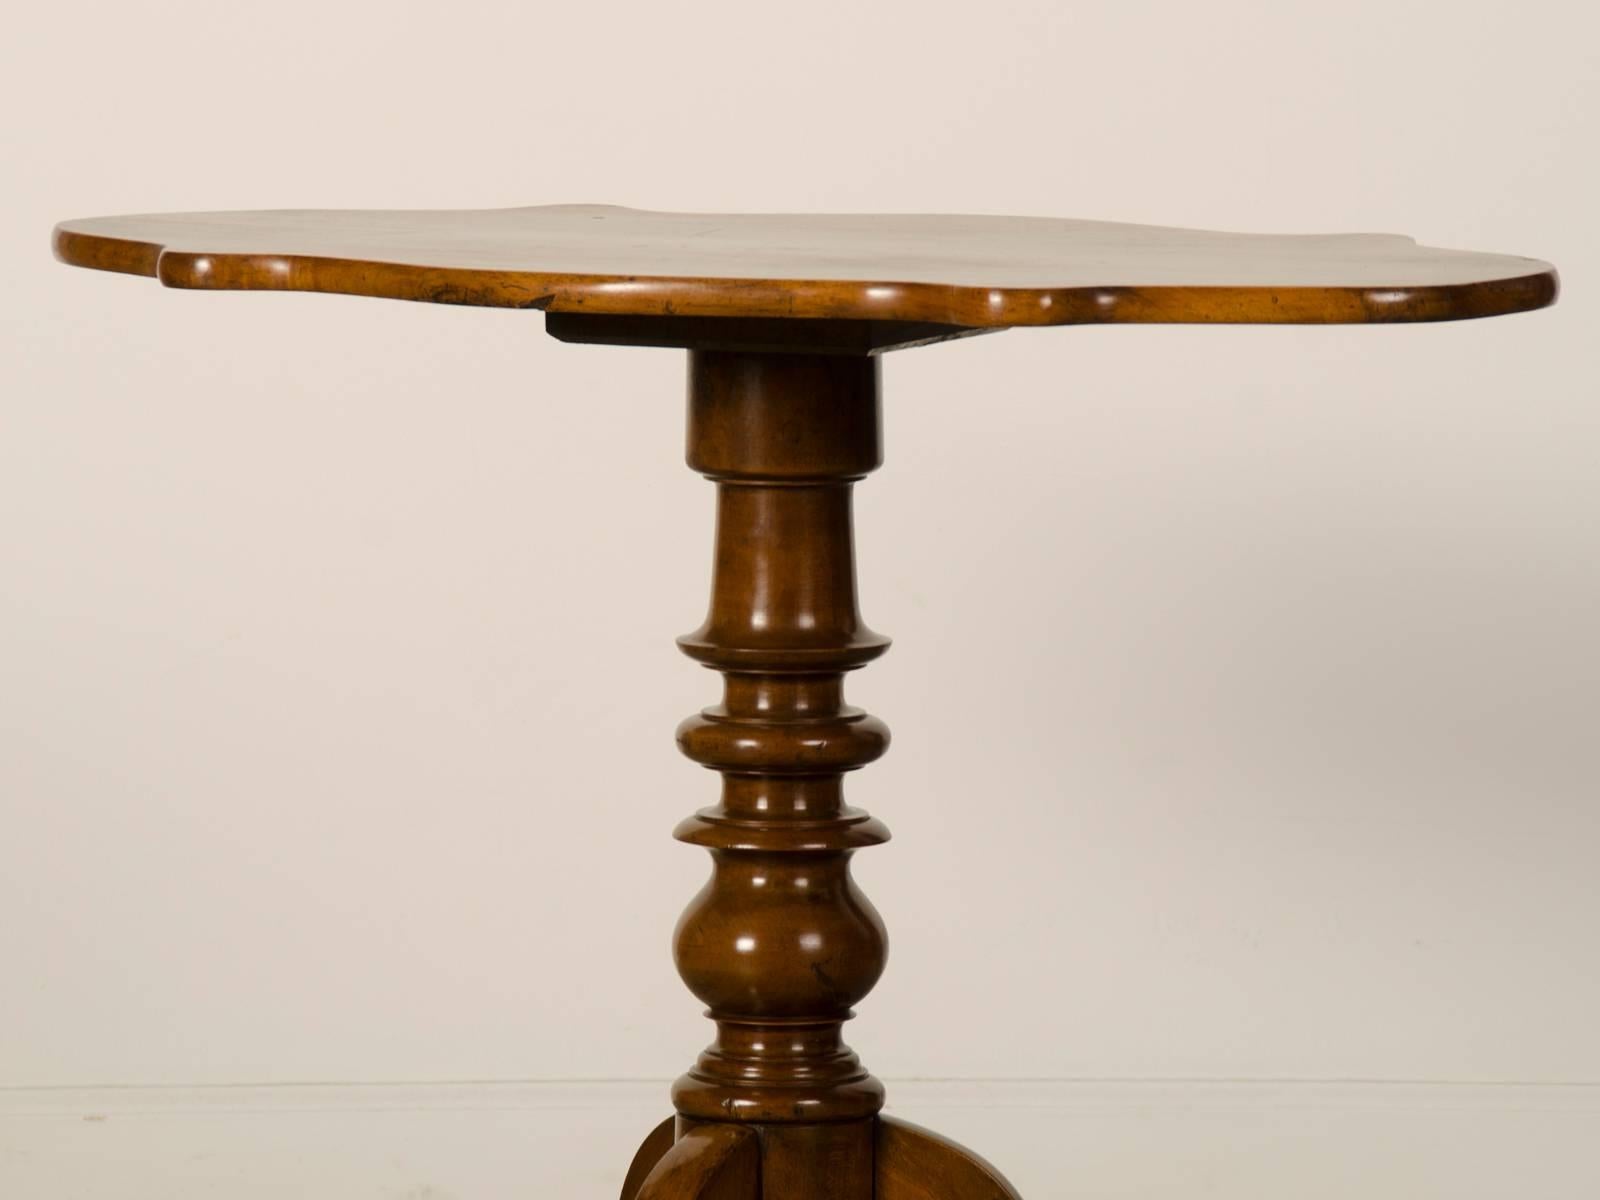 Carved Antique English Oval Mahogany Pedestal Table, circa 1860 For Sale